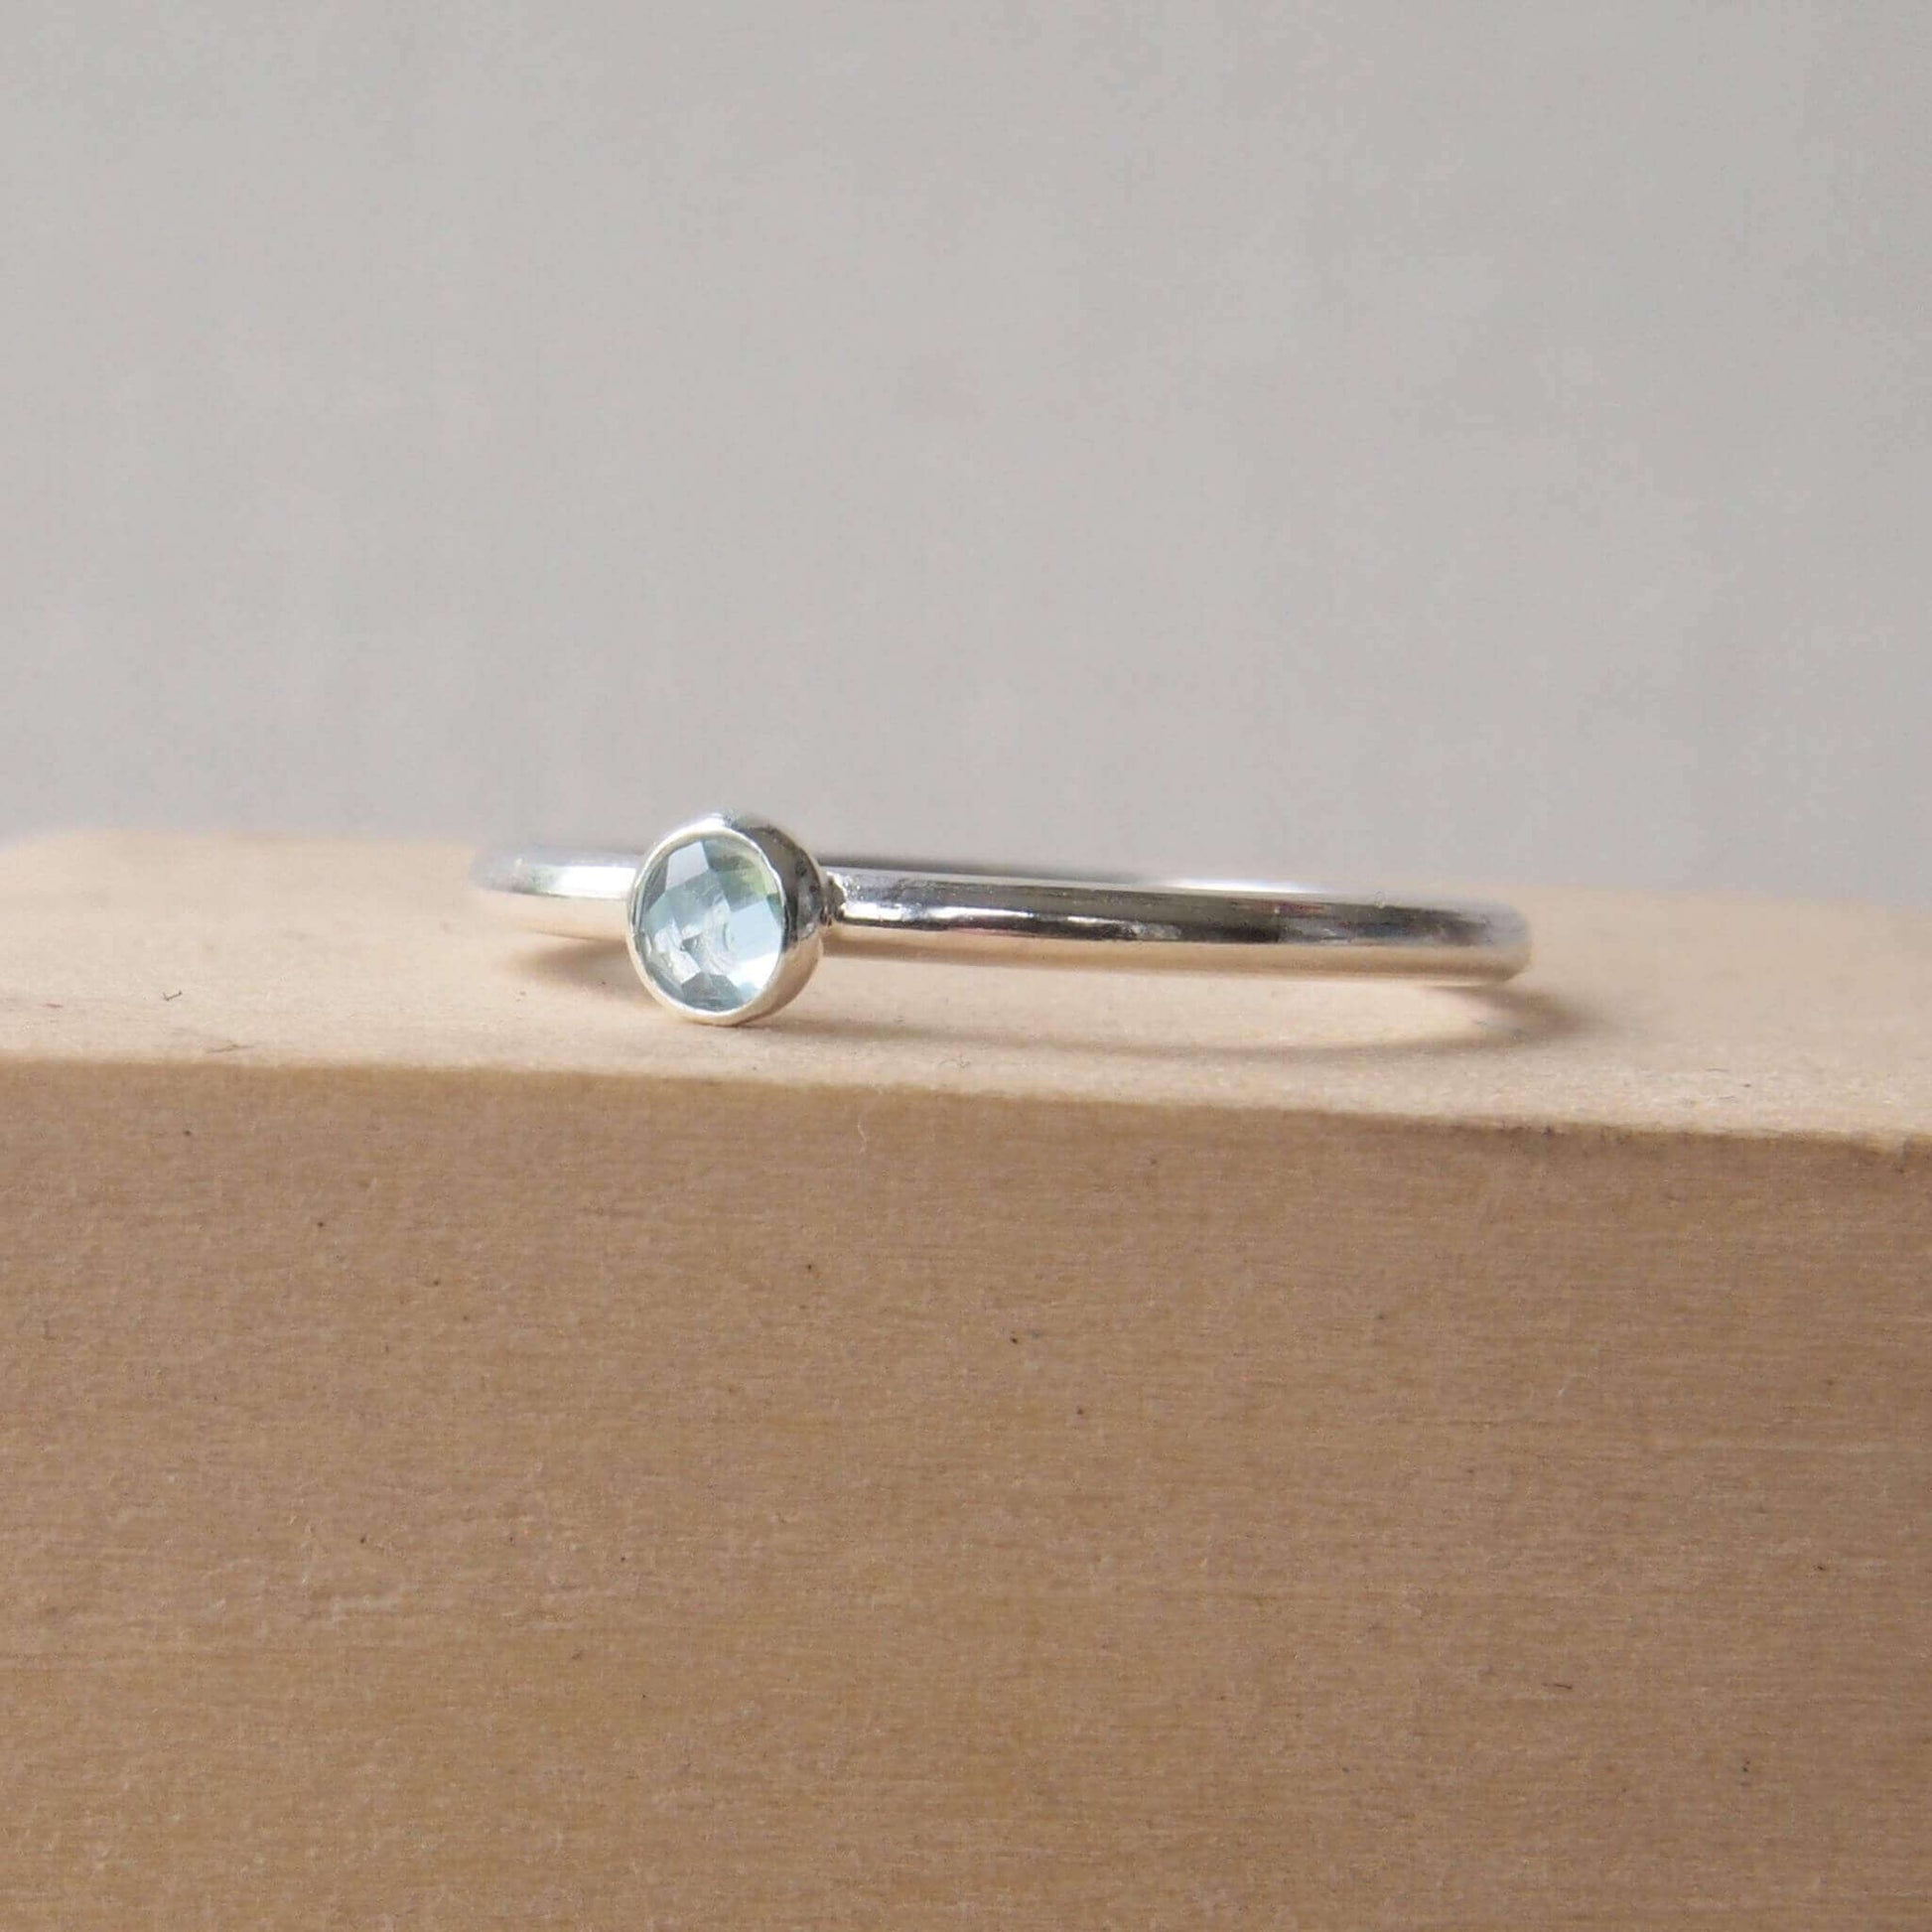 Sterling Silver and Blue topaz single gemstone ring with a small stone. The stone is a pale blue round facet cut cabochon which is simply set onto a round band of Sterling Silver. The ring is handmade to your size by Maram Jewellery